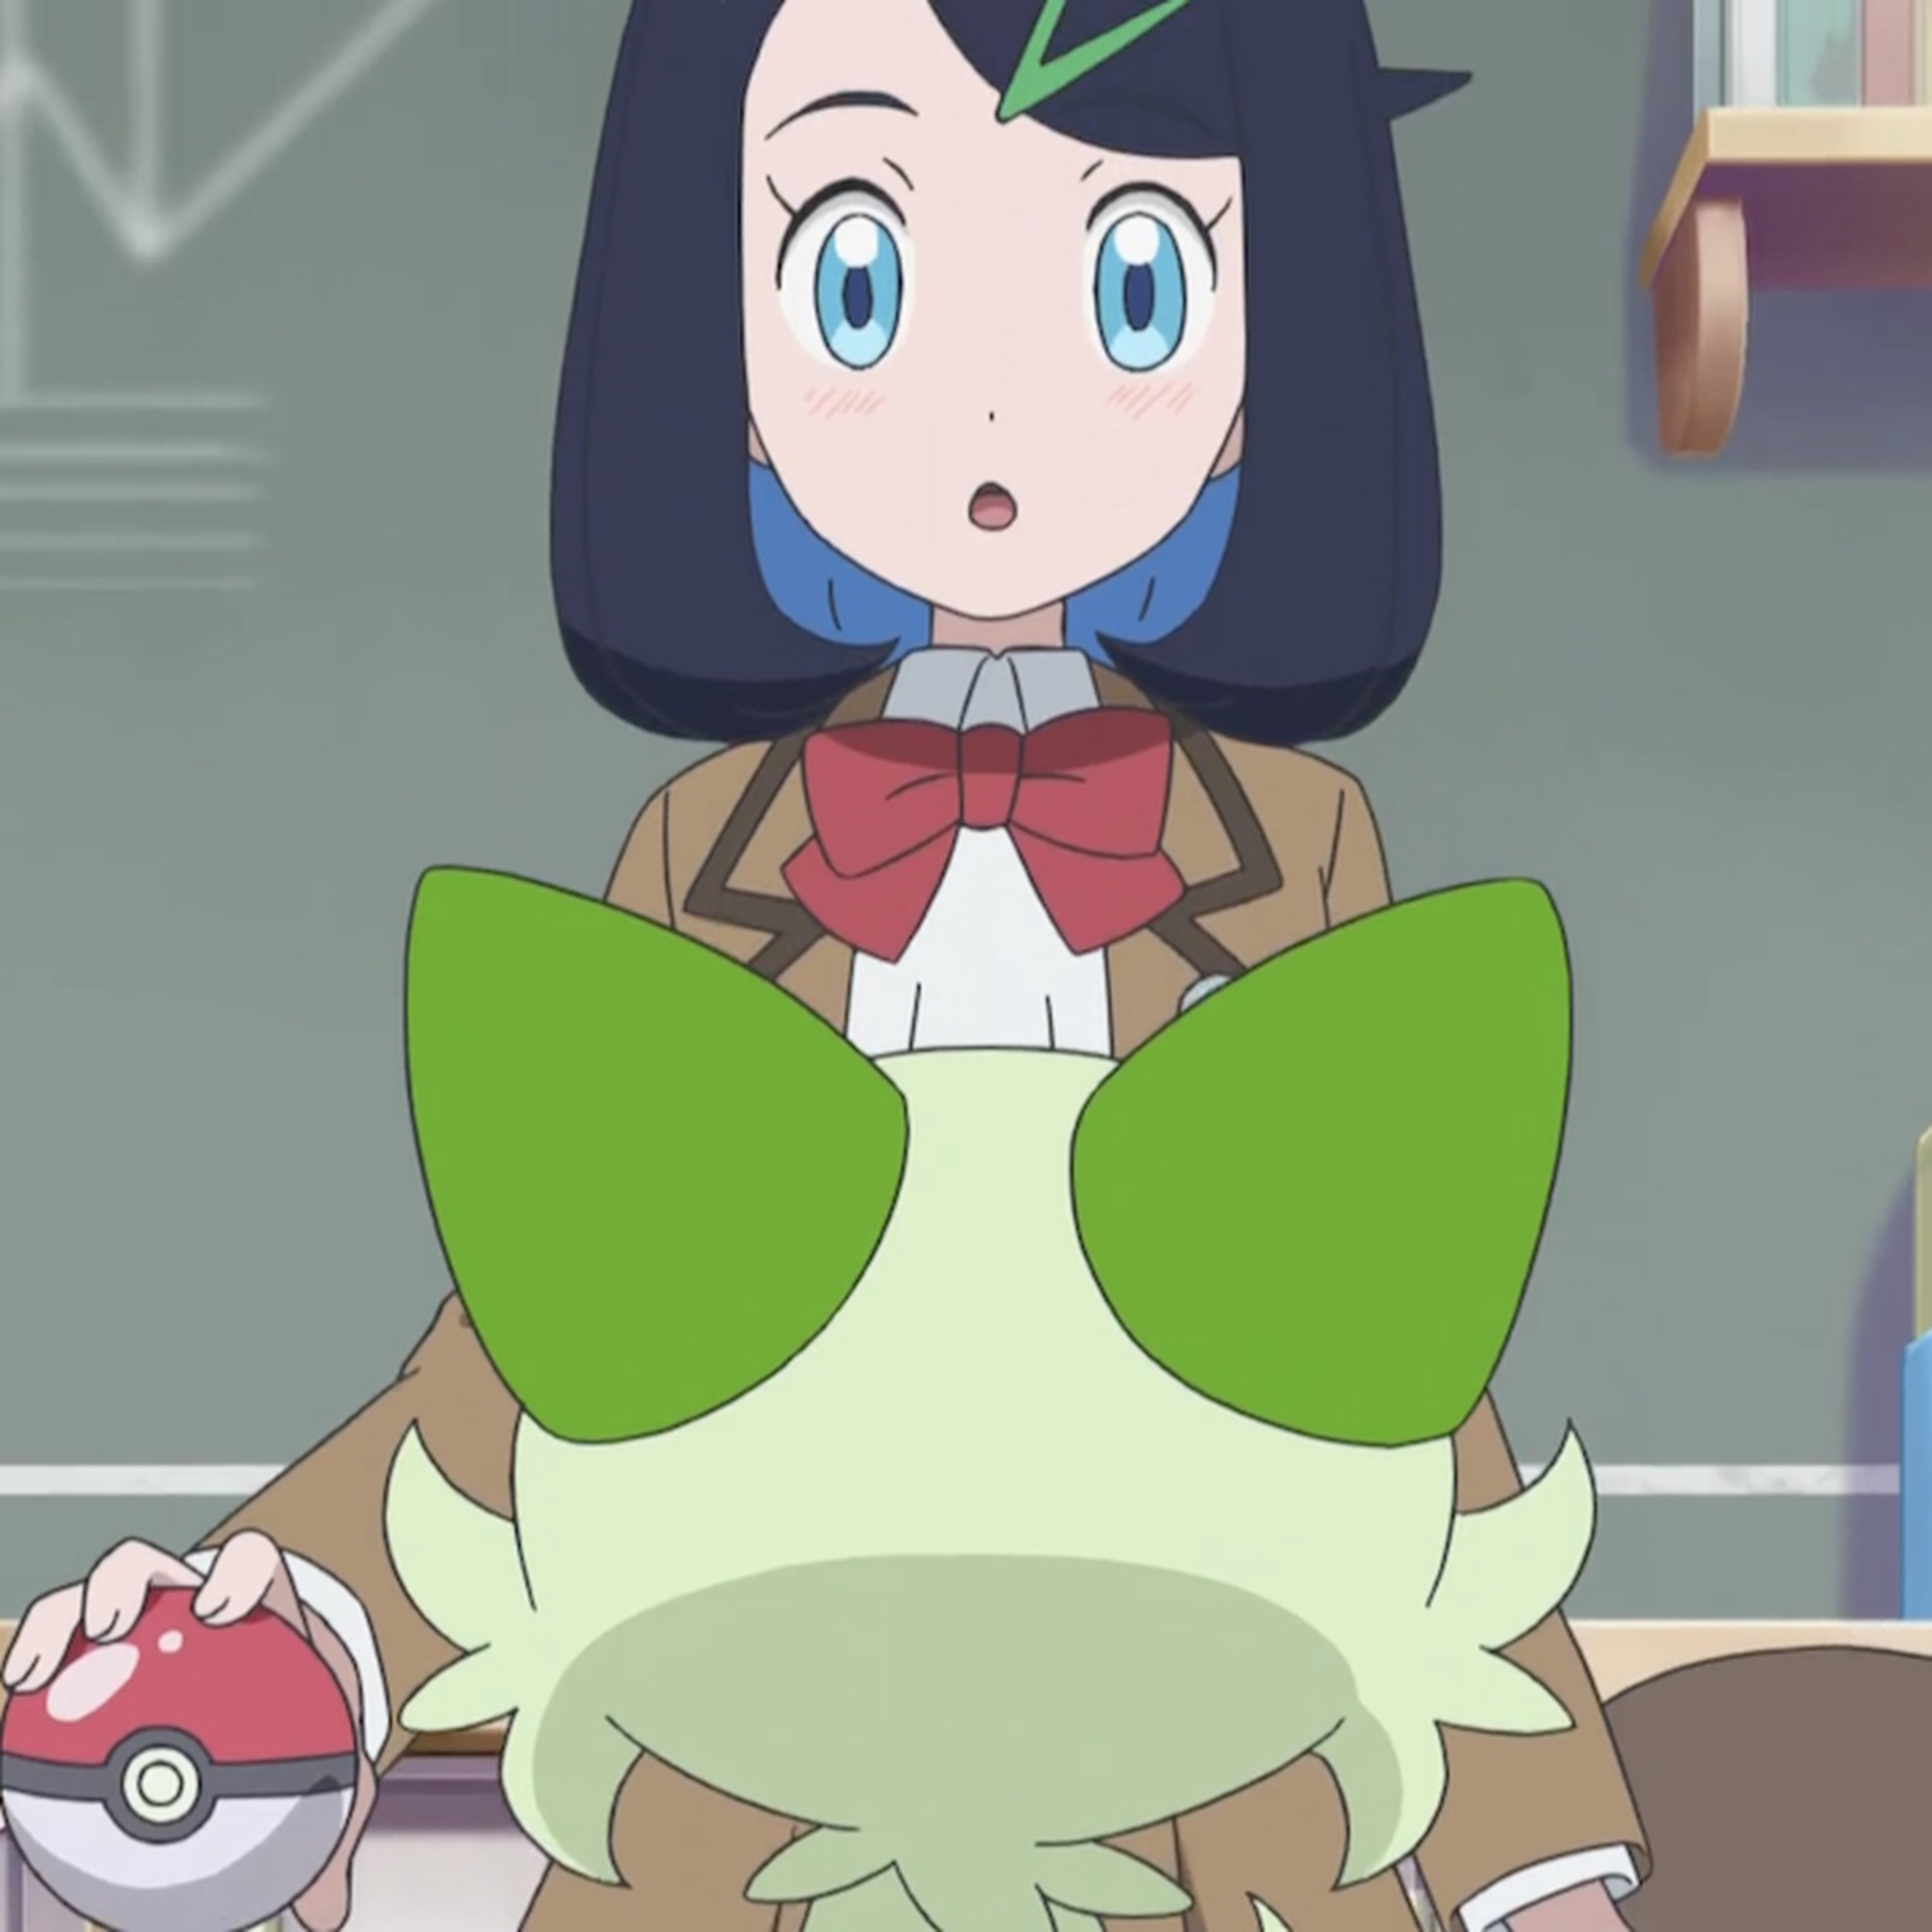 A girl in a brown Japanese school uniform looking down at a green cat that’s facing her.